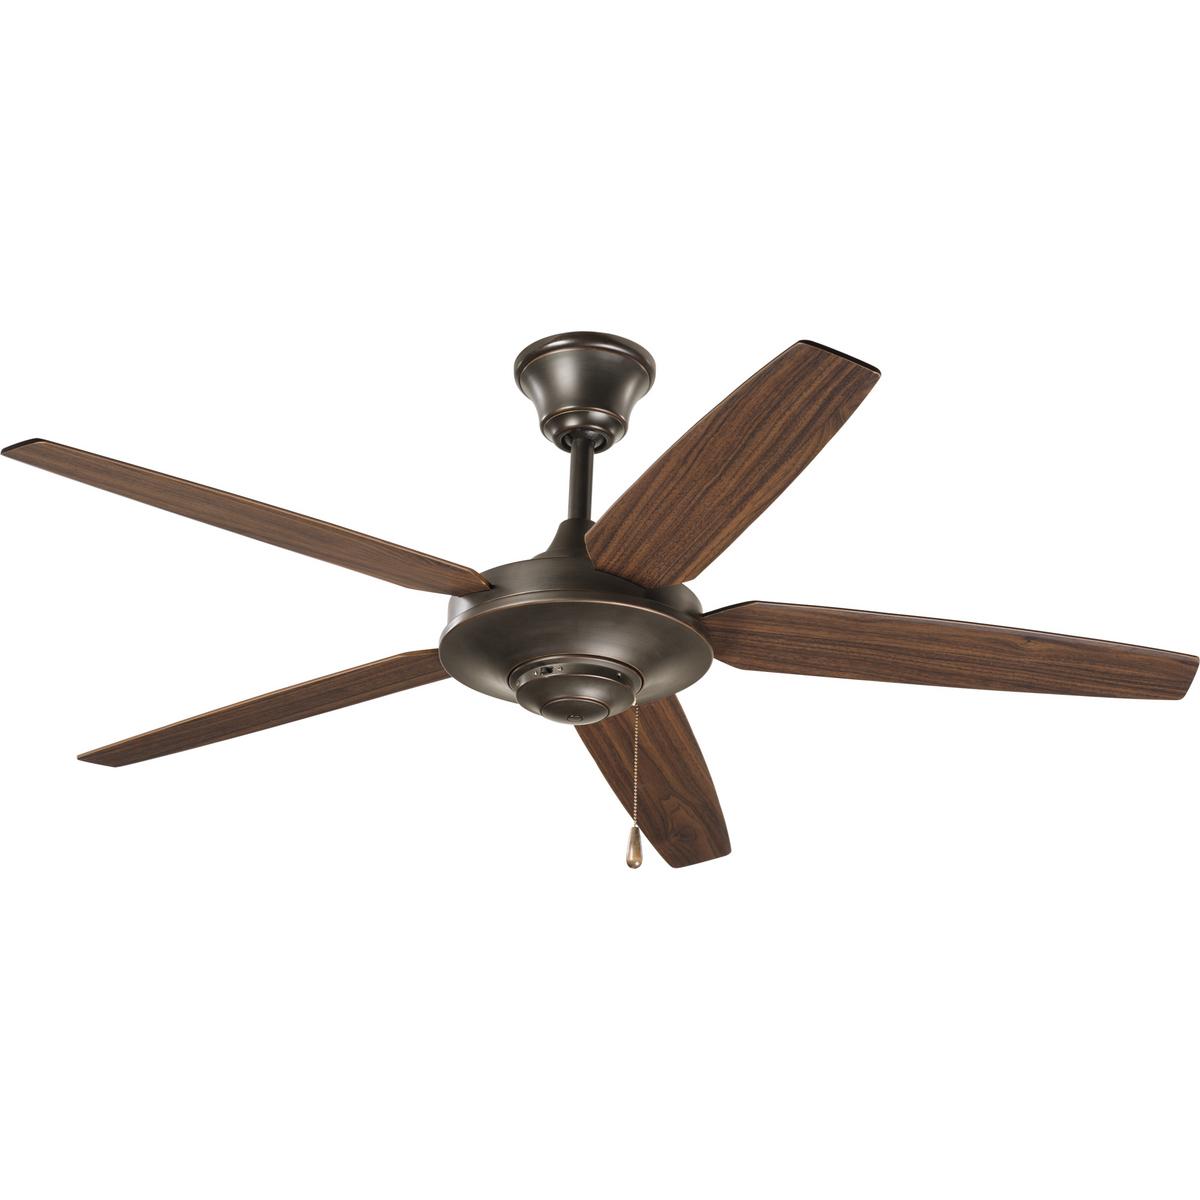 Hubbell P2530-20 54" five-blade fan with reversible Medium Cherry/Classic Walnut blades and an Antique Bronze finish. The AirPro Signature ceiling fan offers great performance and value. This contemporary styled fan features a powerful, 3-speed motor that can be reversed 